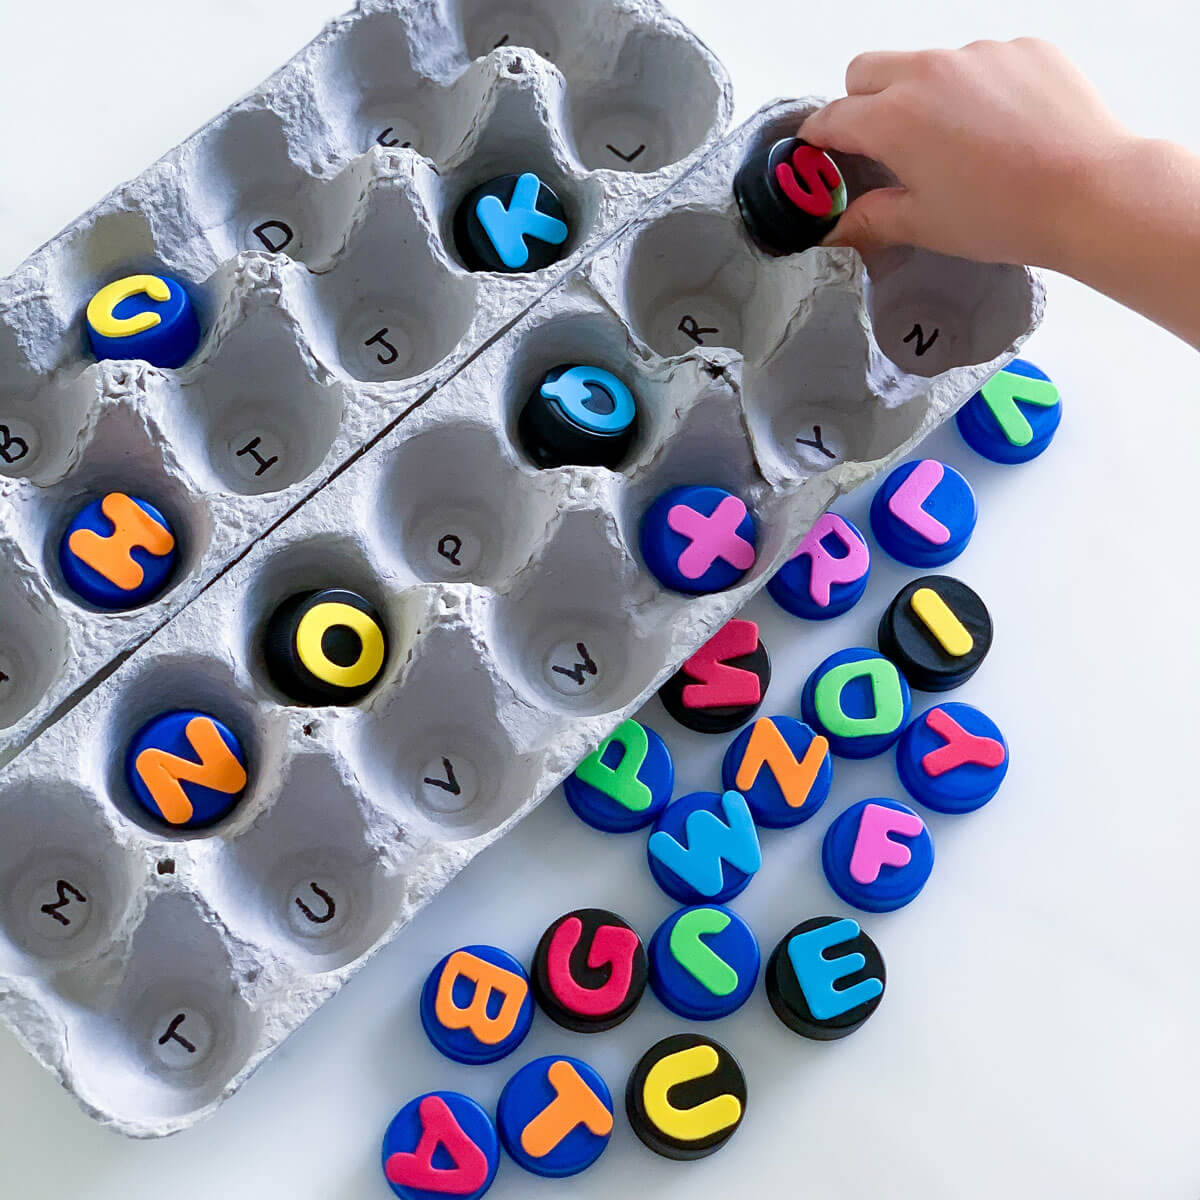 Matching Letter Game – A DIY Puzzle Made with Recycled Materials